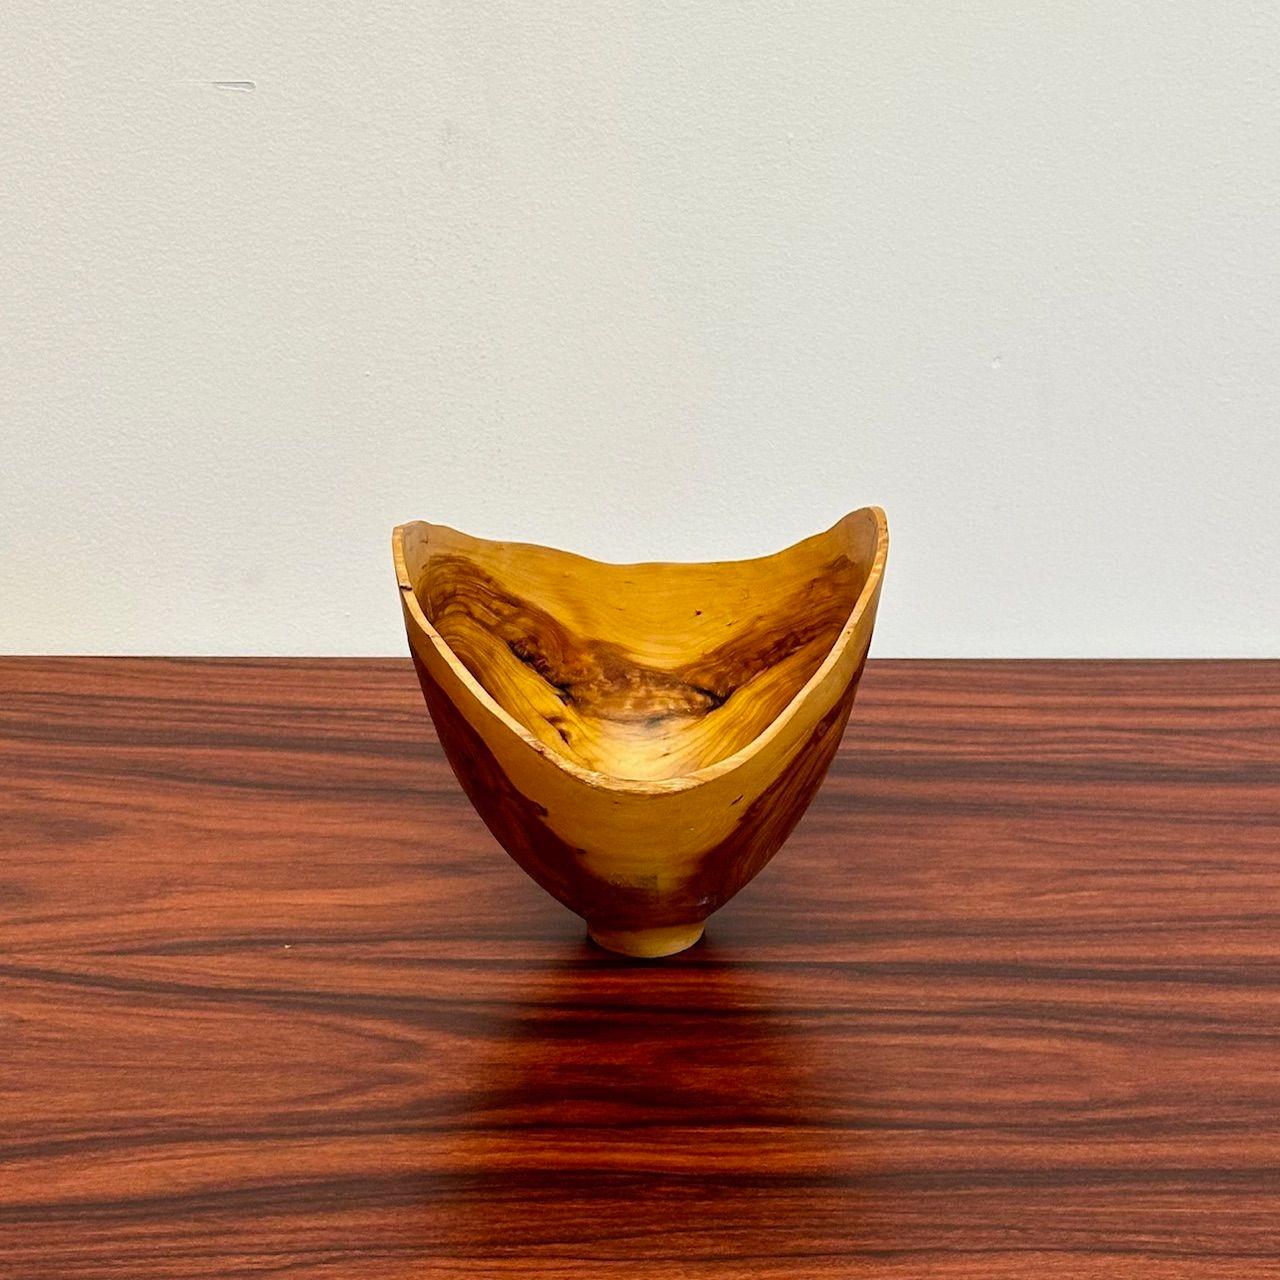 Late 20th Century Mid-Century Modern Studio Made Bowl / Vessel, Tableware, White Cedar, Signed For Sale